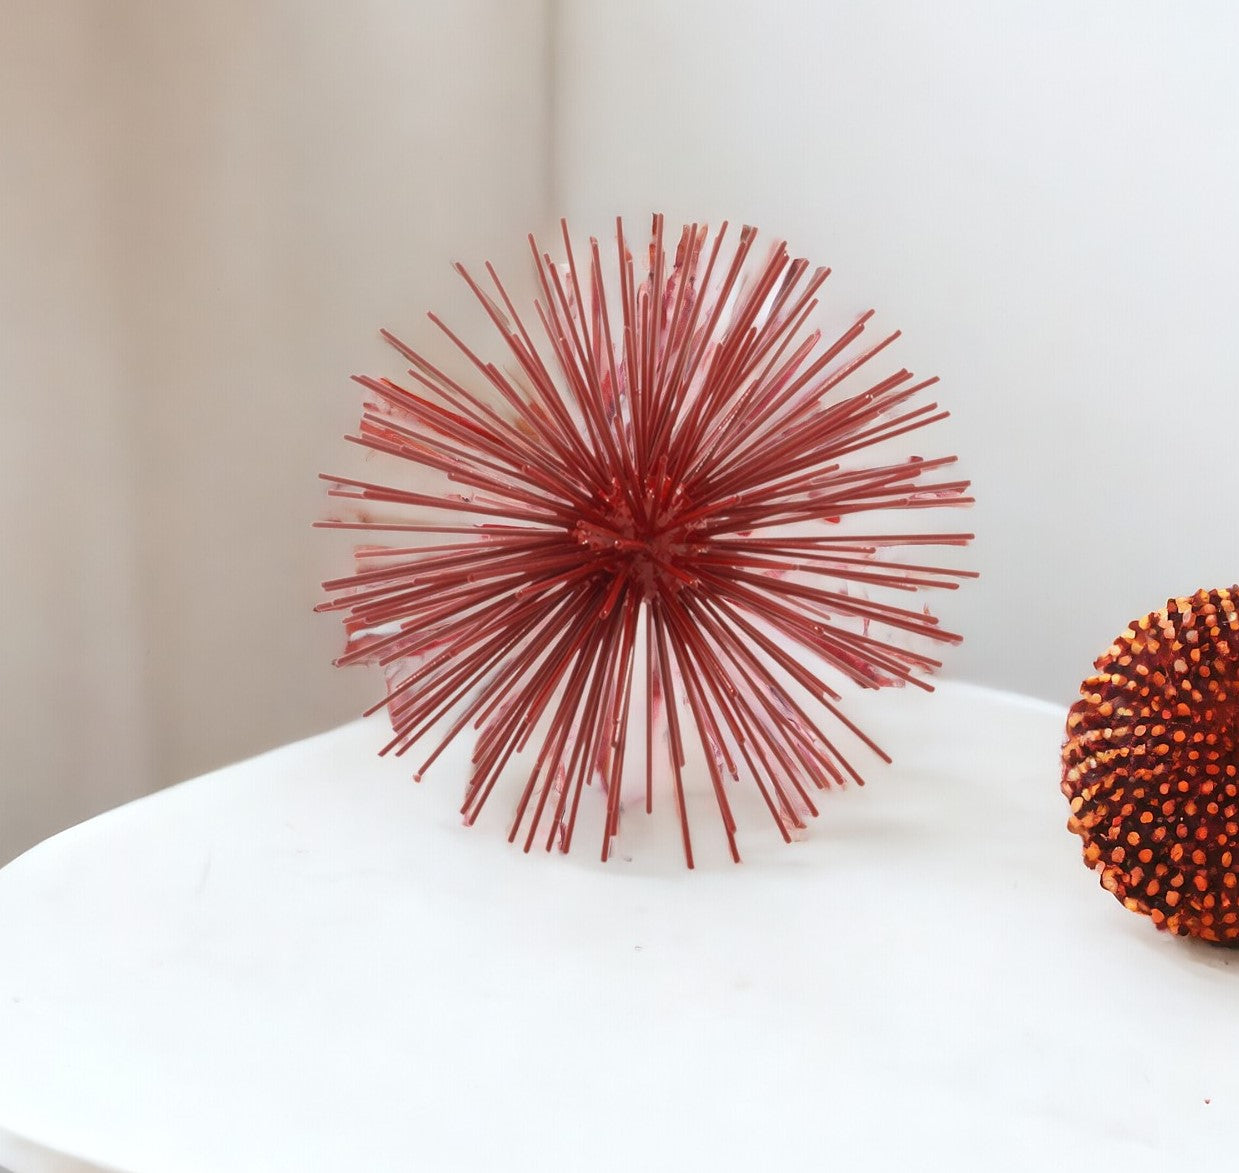 10" X 10" X 10" Red Large Spiked Sphere